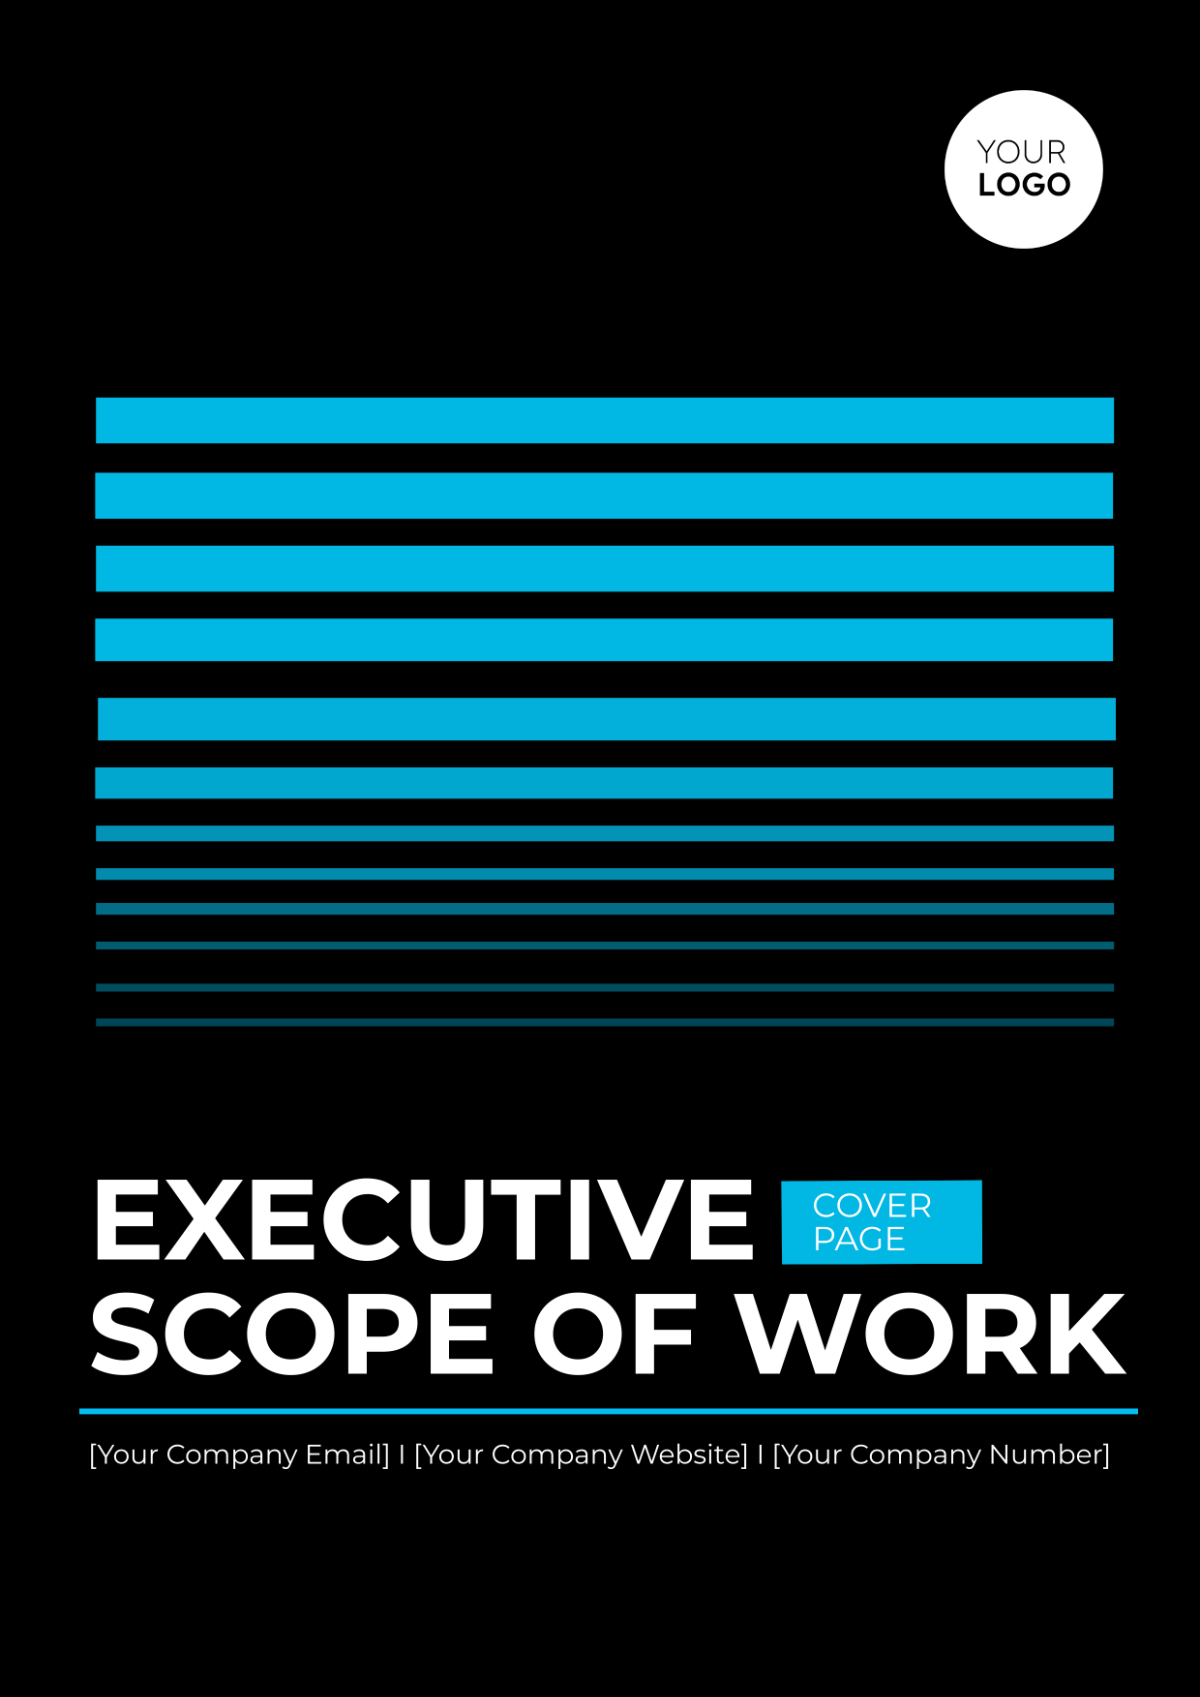 Executive Scope of Work Cover Page